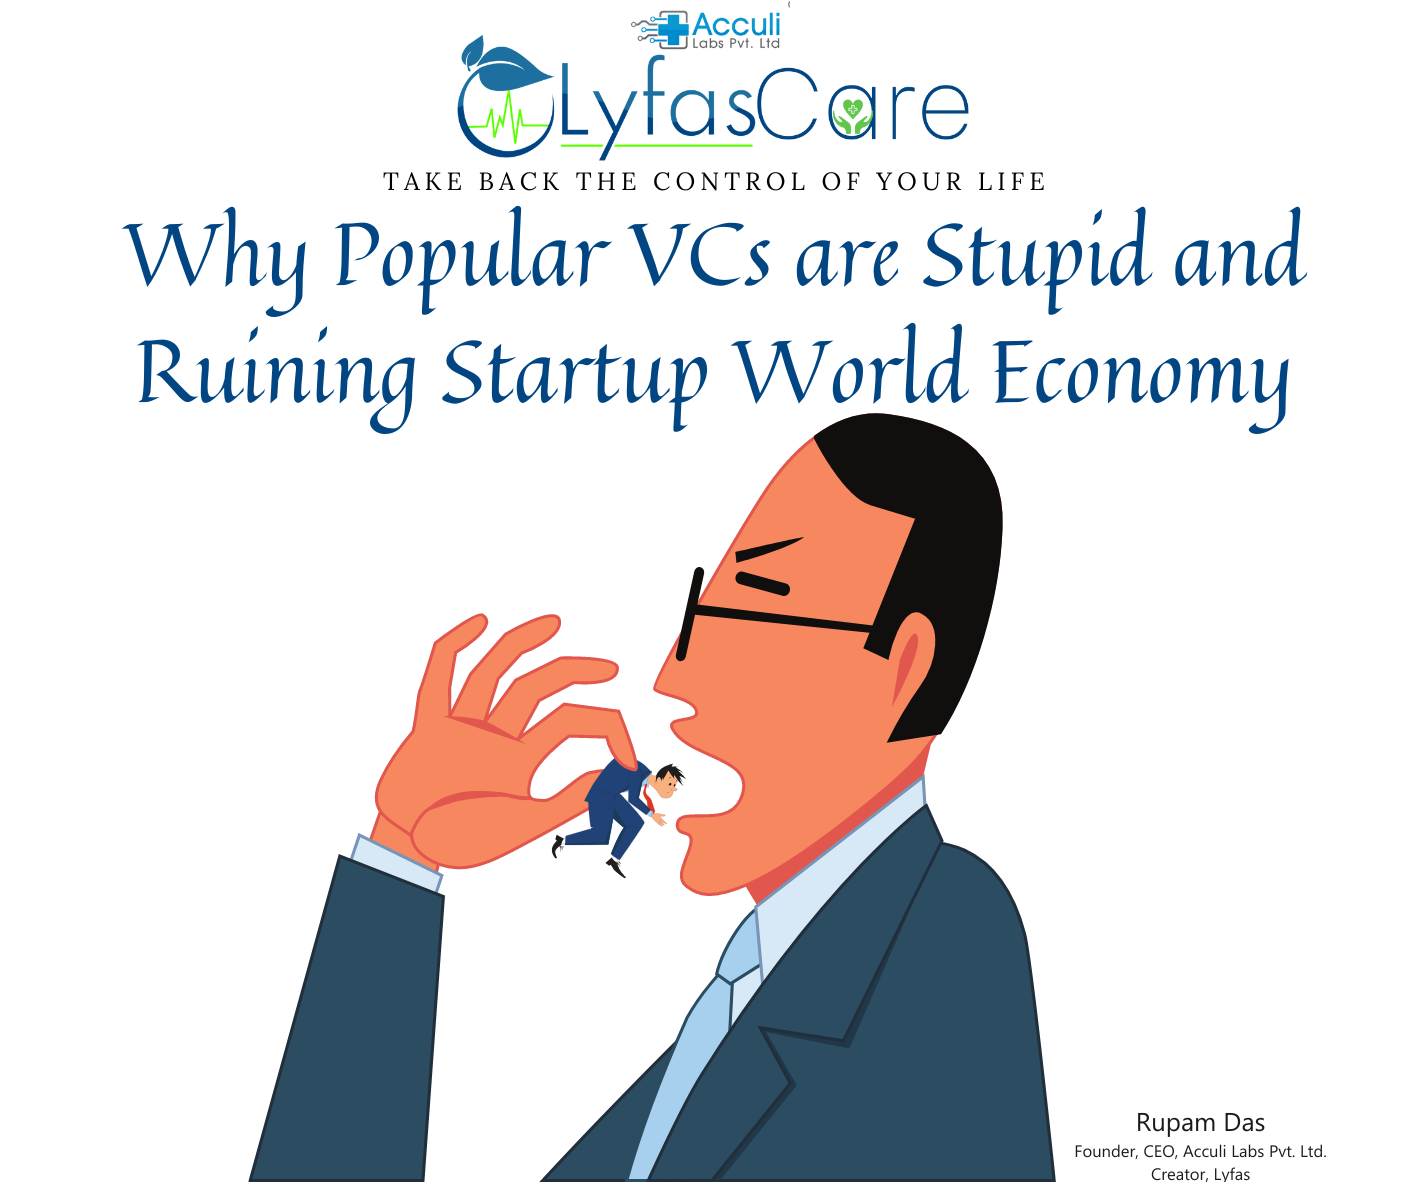 Why Popular VCs are Stupid and Ruining Startup World Economy